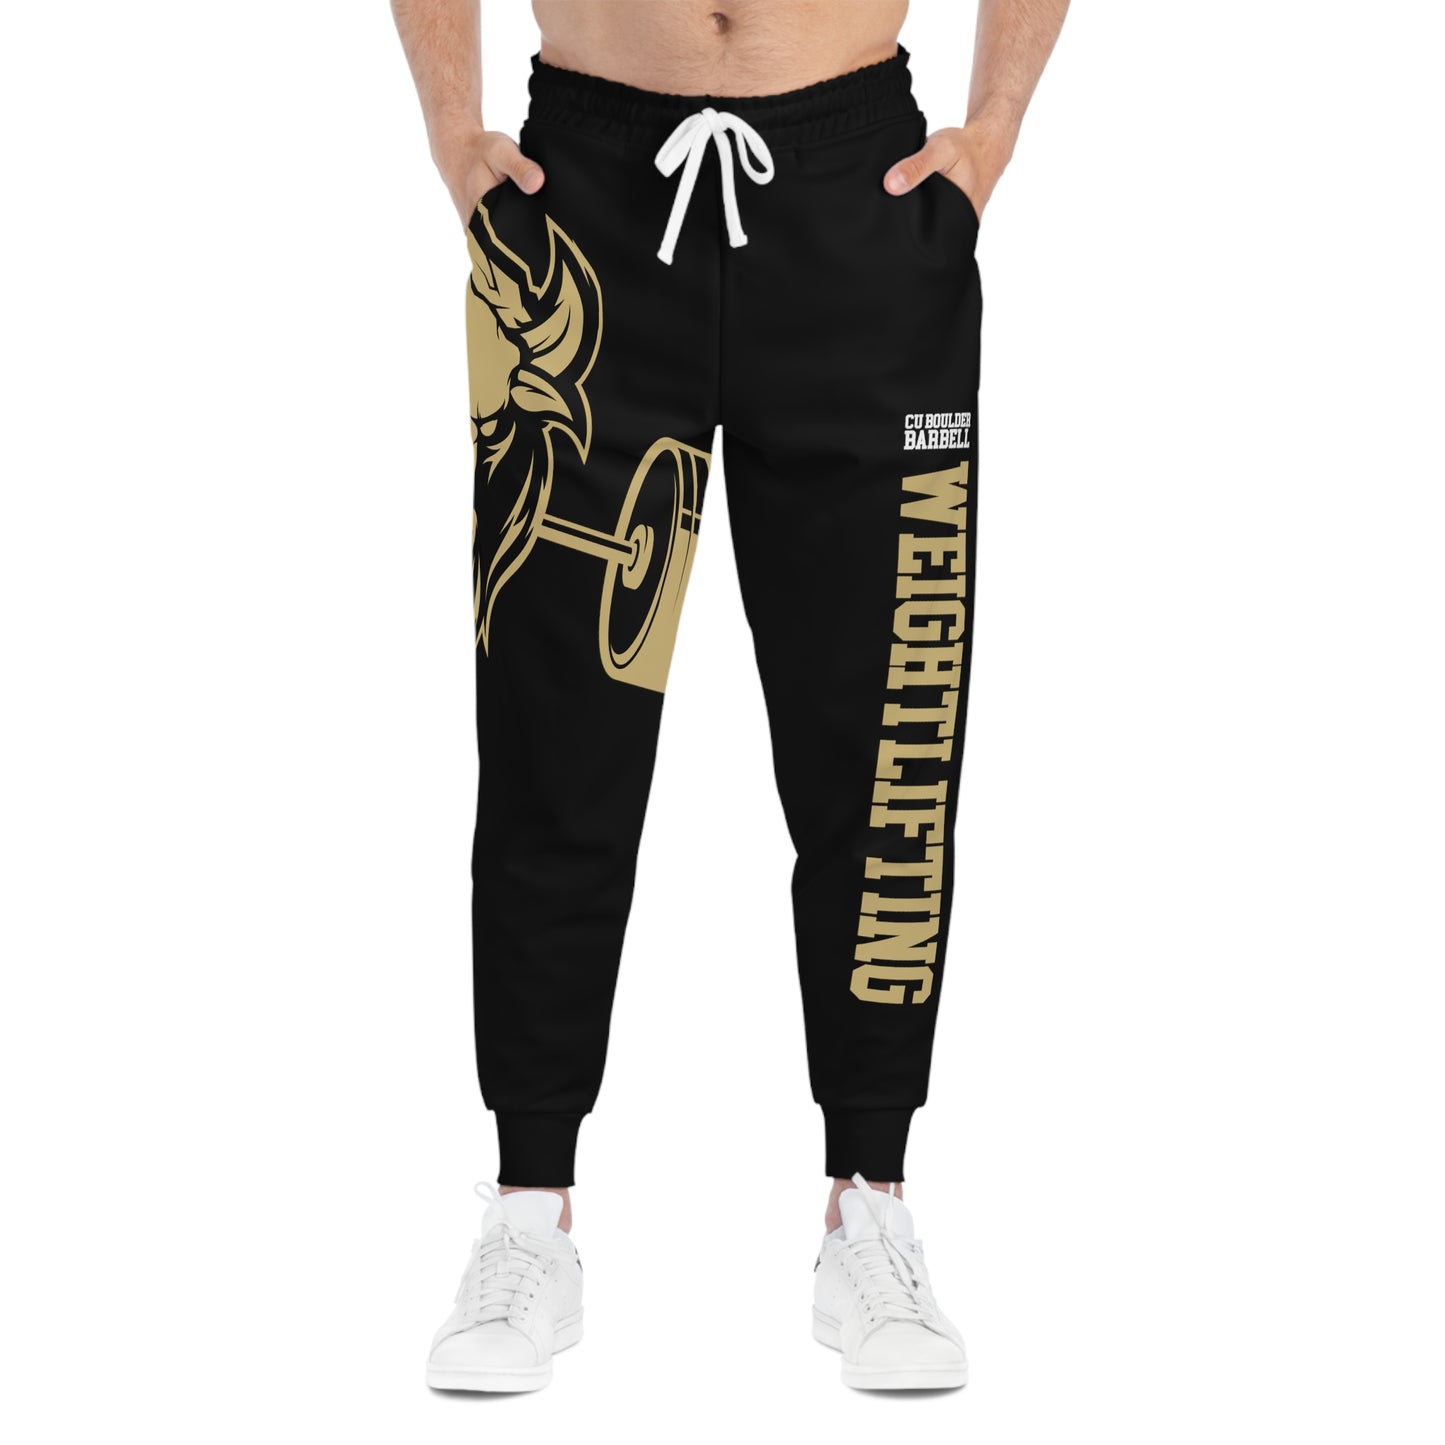 CU Barbell Weightlifting Warm-Up Joggers (Black)